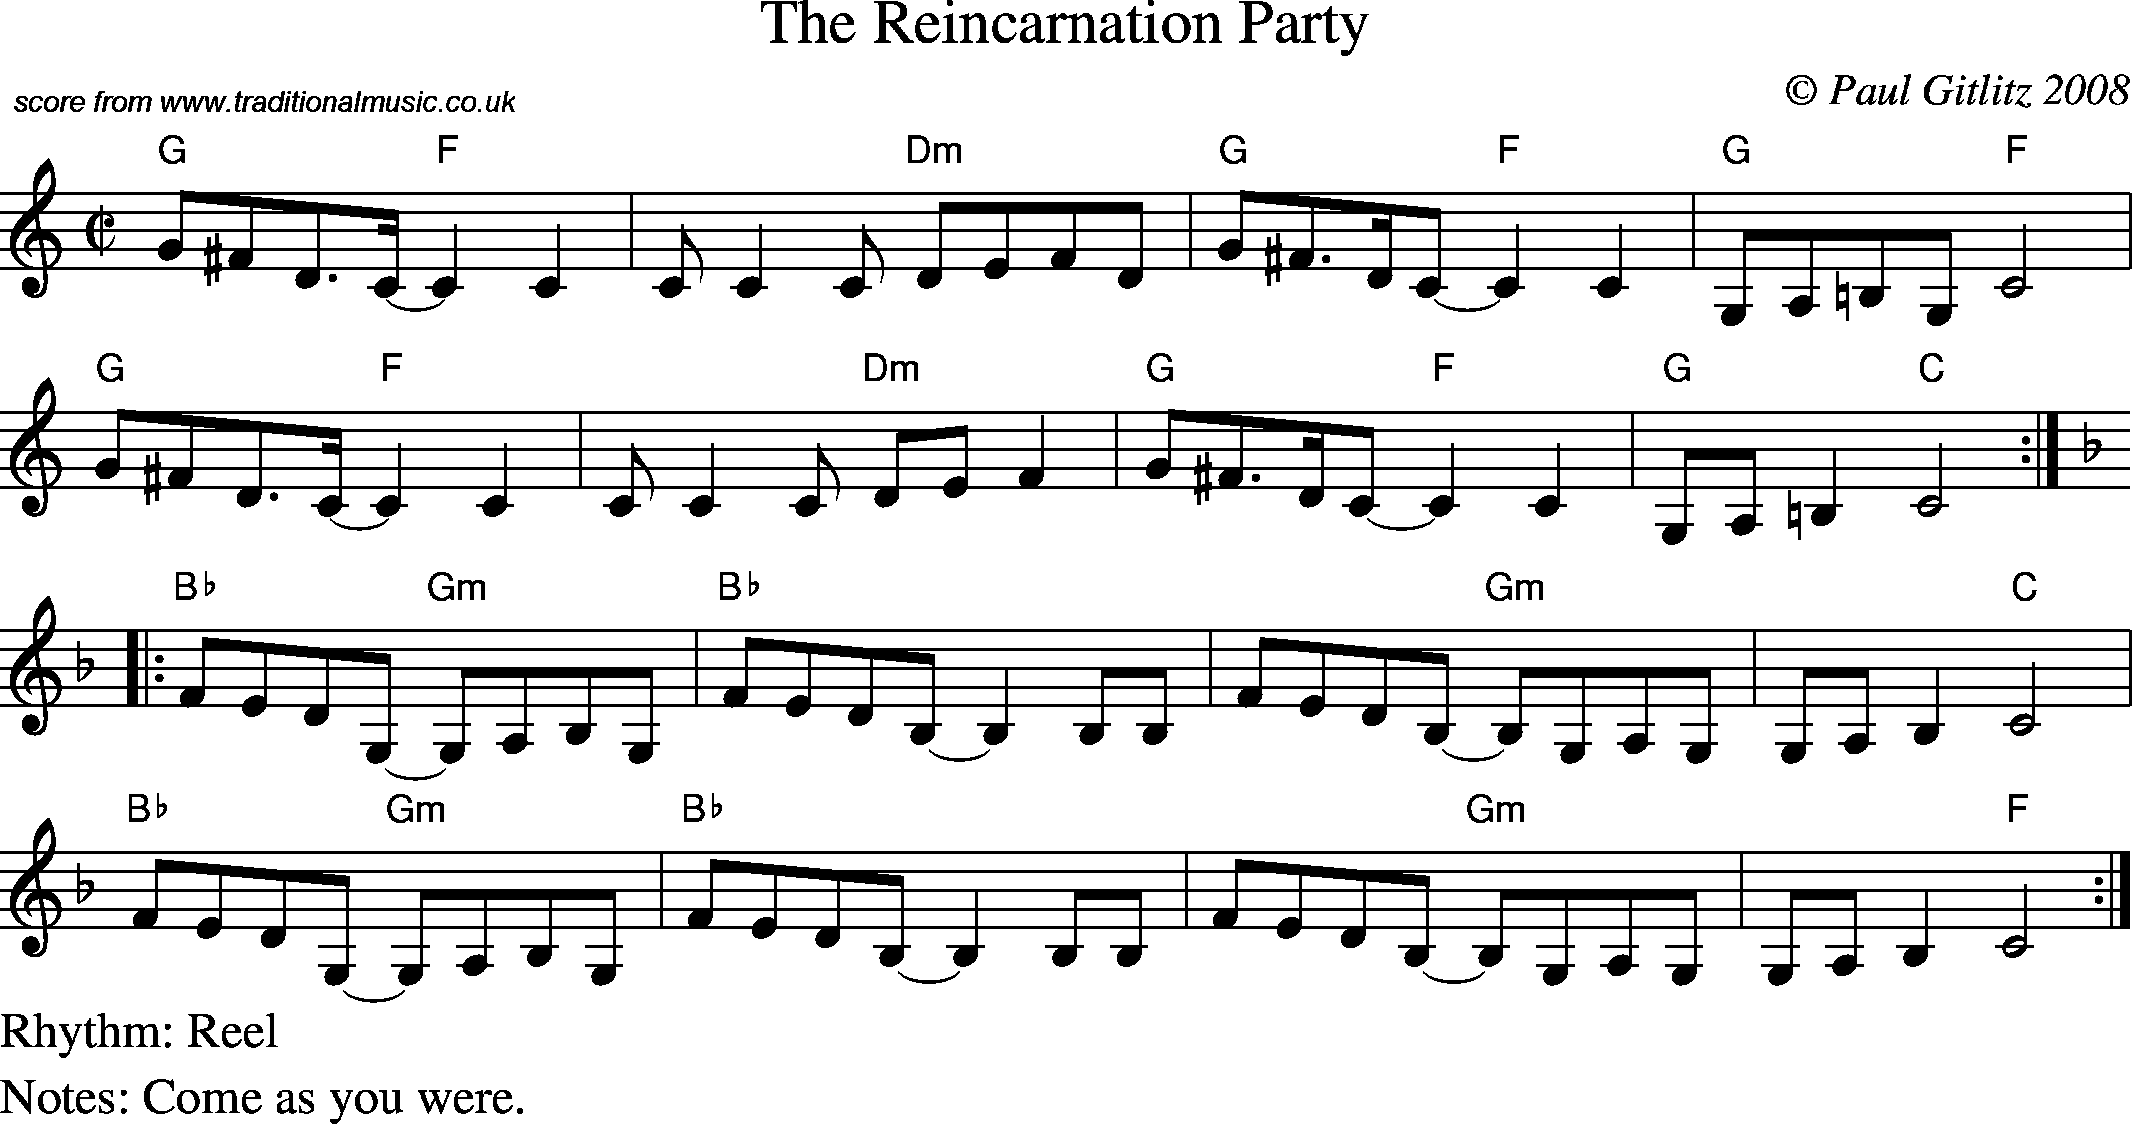 Sheet Music Score for Reel - Reincarnation Party, The